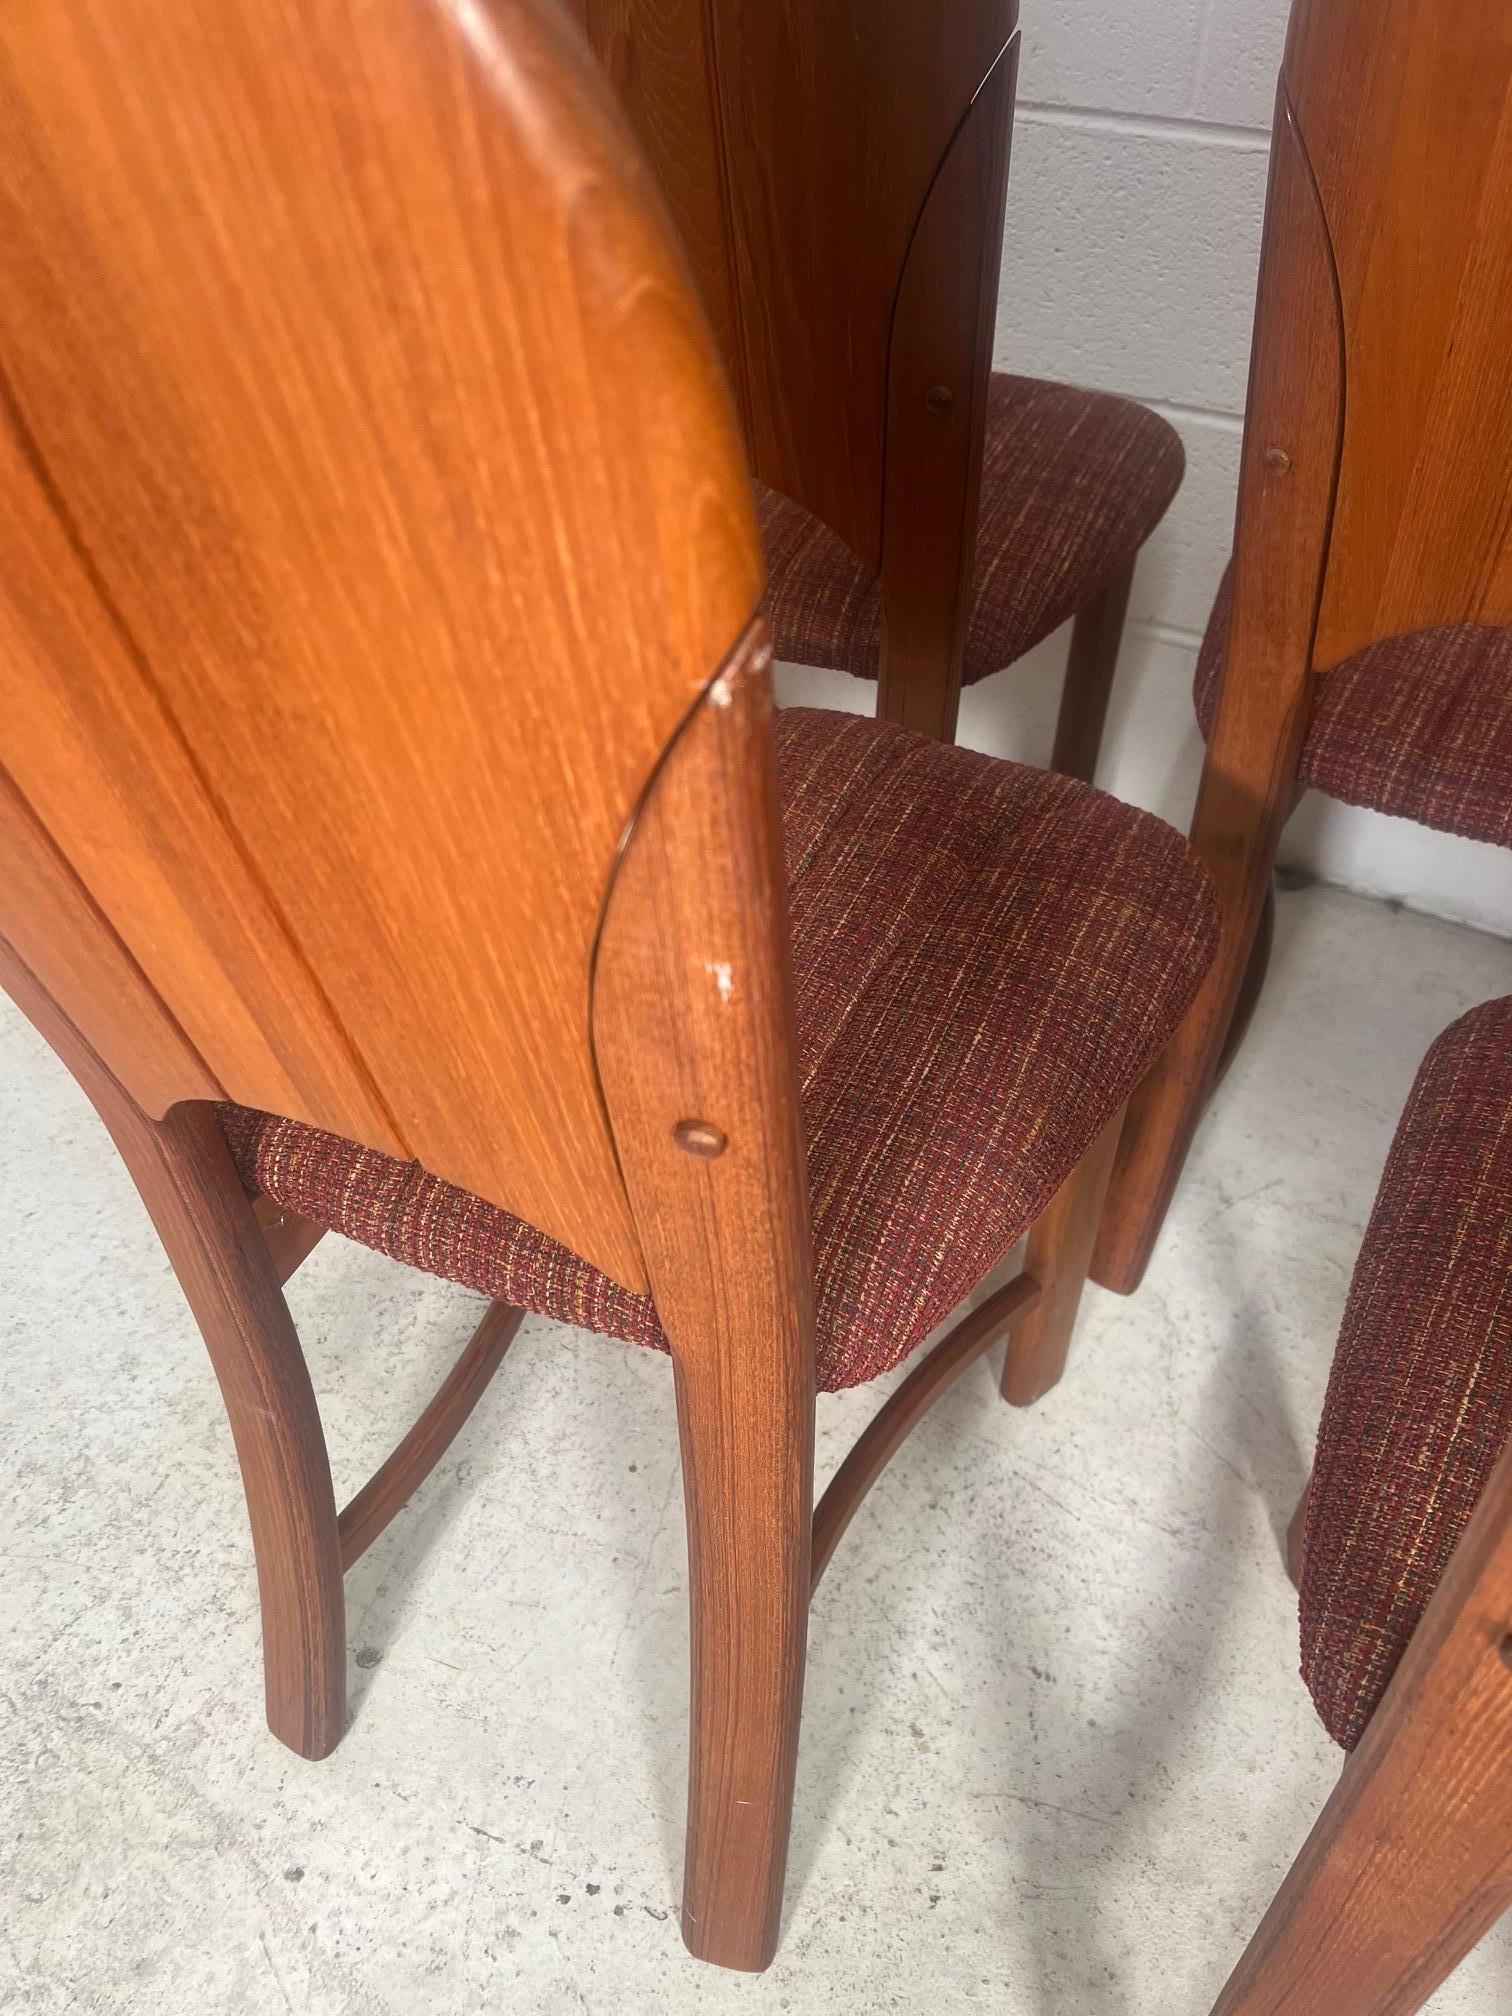 Thai Set Of 6 Mid Century Modern Danish Teak Dining Chairs By D-Scan For Sale